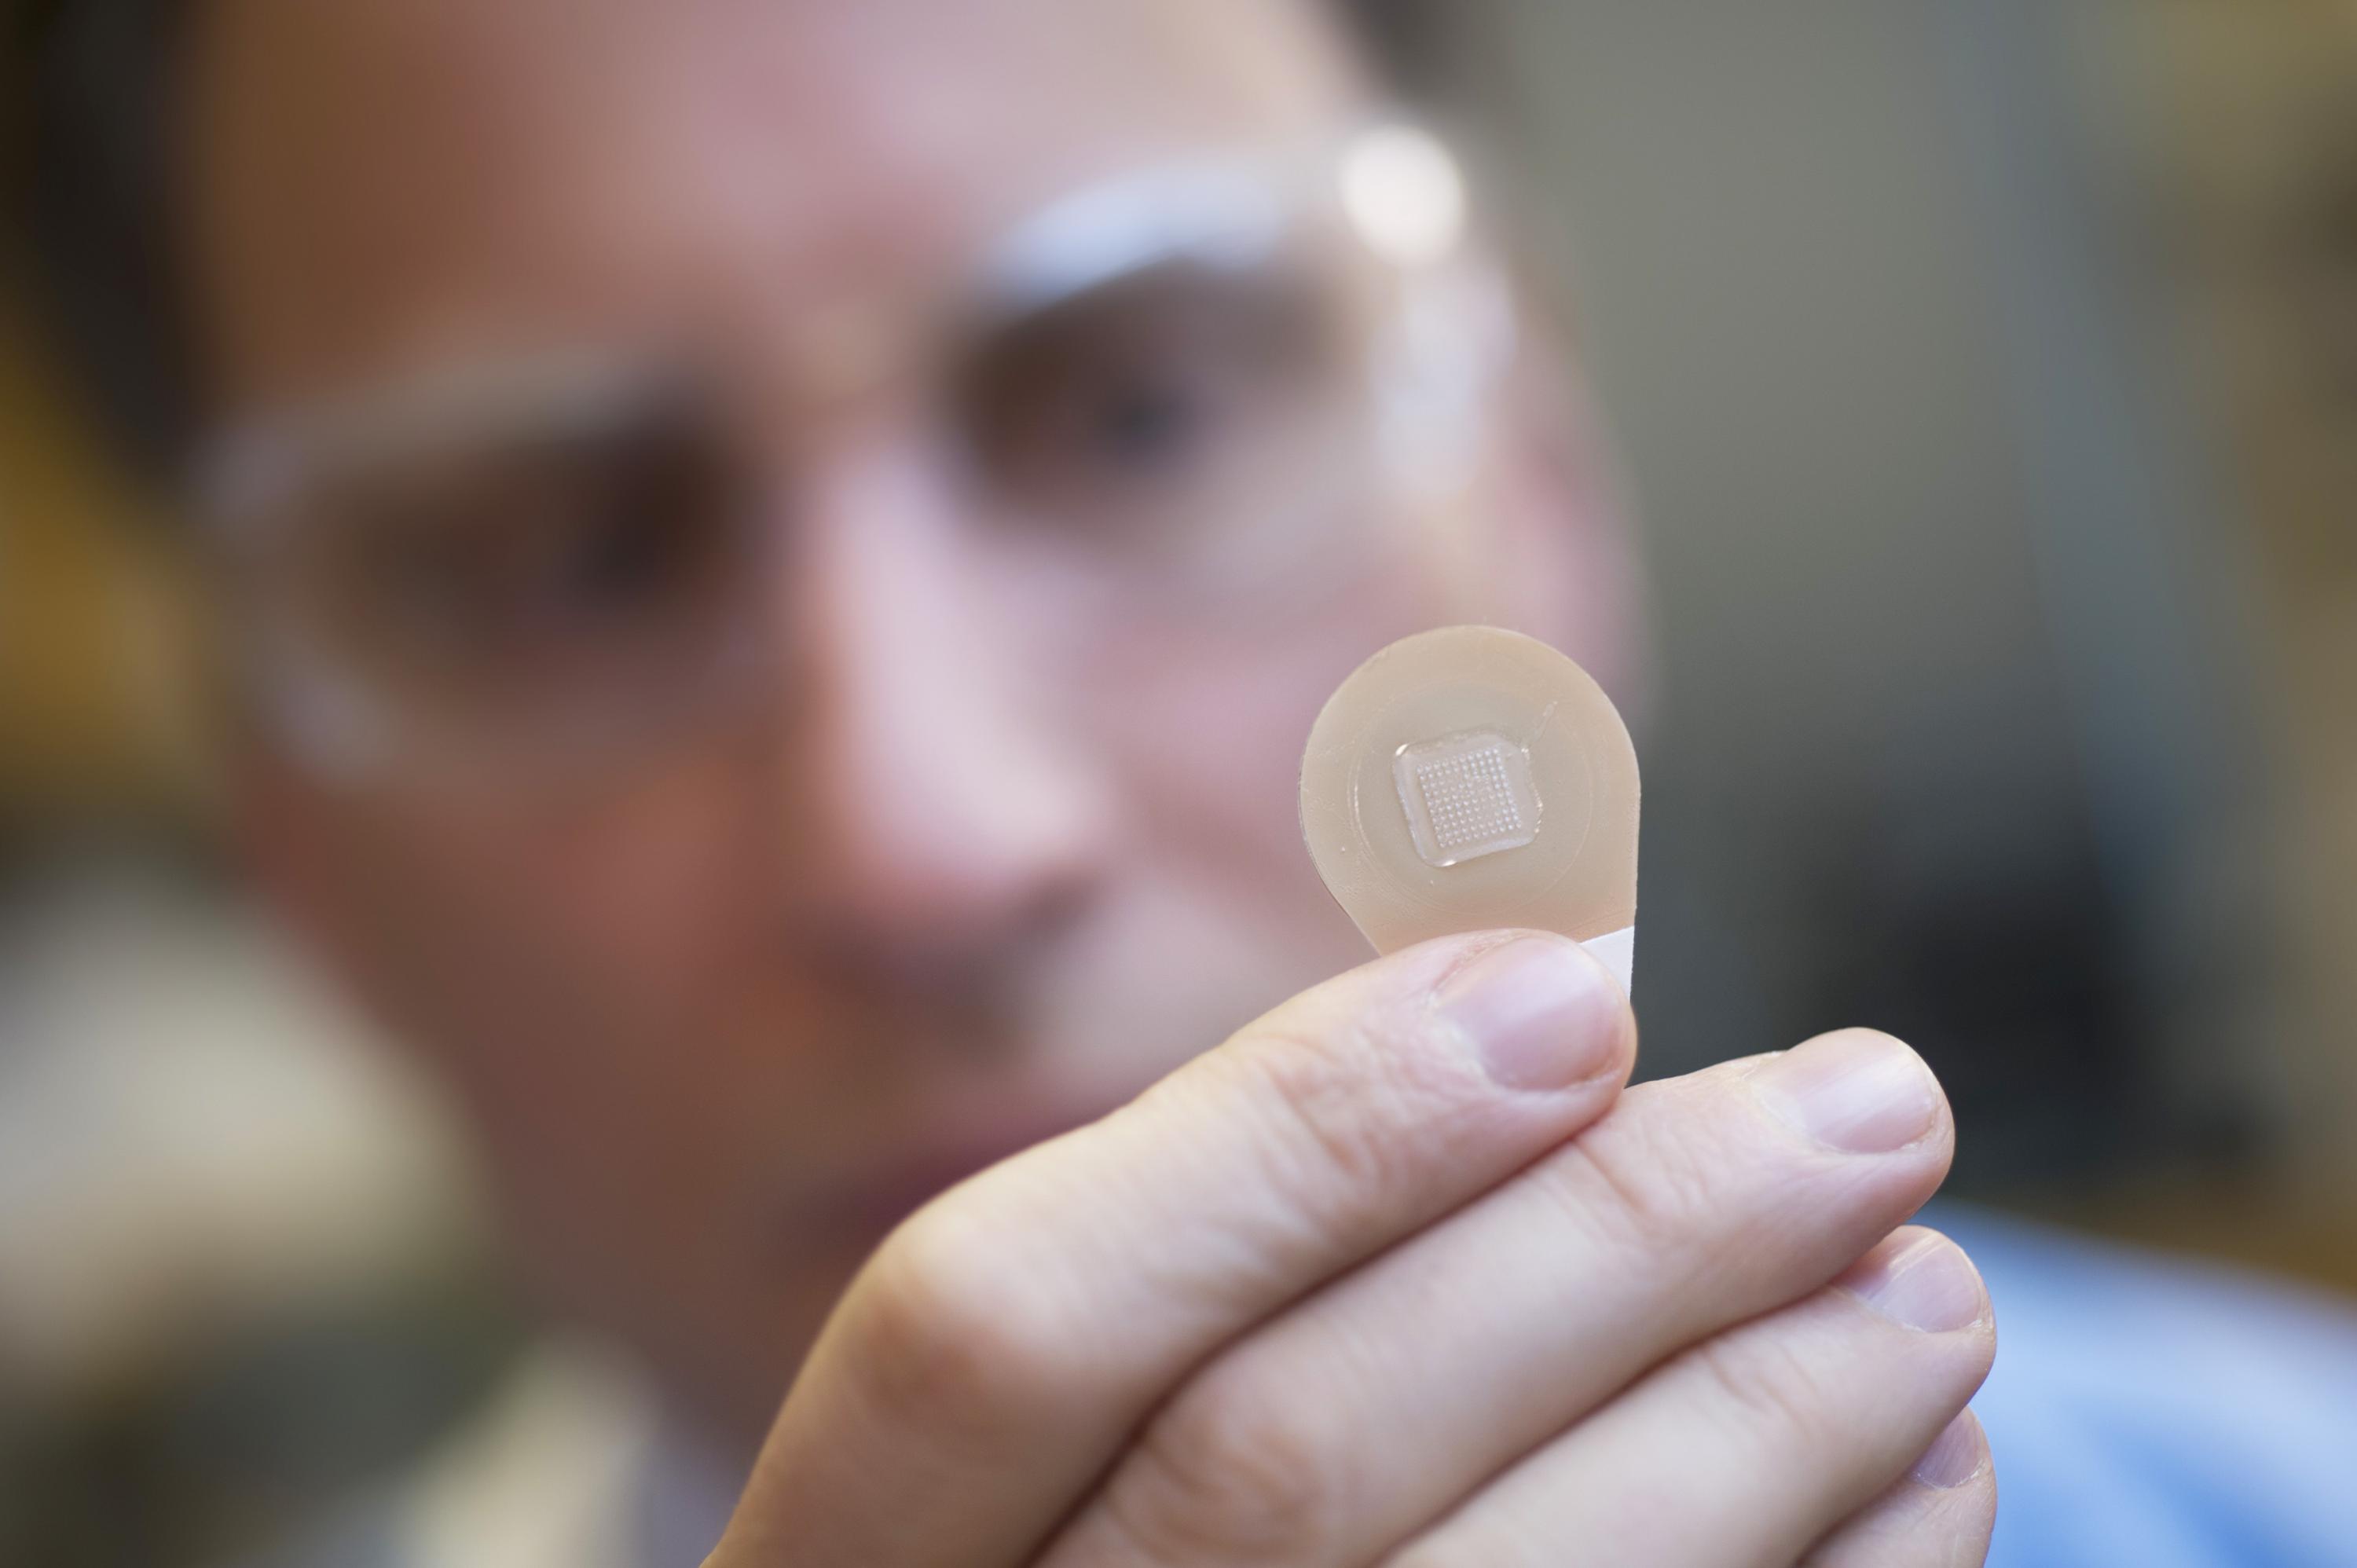 Mark Prausnitz, Ph.D., Georgia Tech Regents professor in the School of Chemical and Biomolecular Engineering, holds a microneedle vaccine patch containing needles that dissolve into the skin. (Credit: Christopher Moore, Georgia Tech)